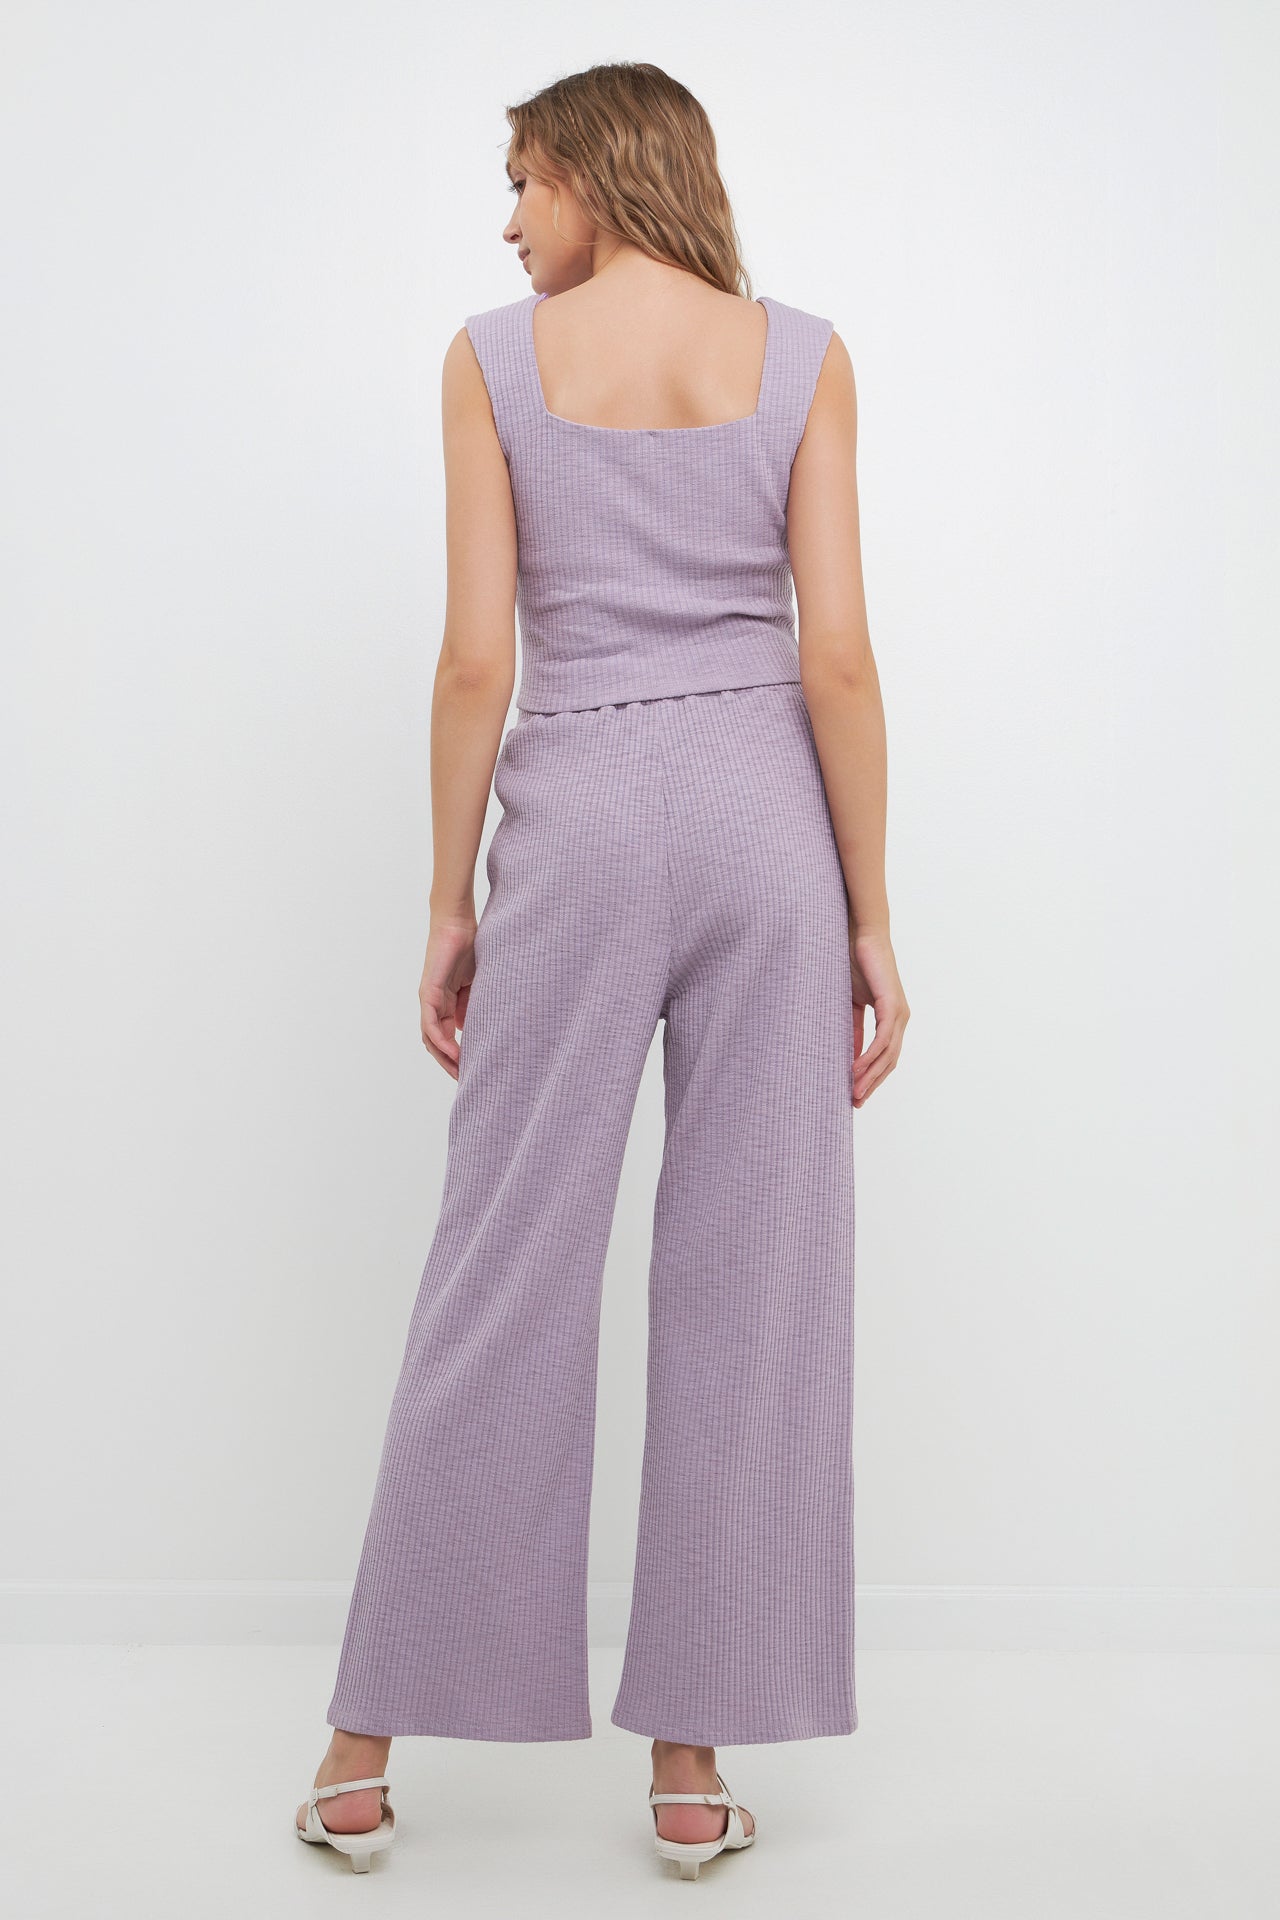 FREE THE ROSES - Loungewear Pants - PANTS available at Objectrare